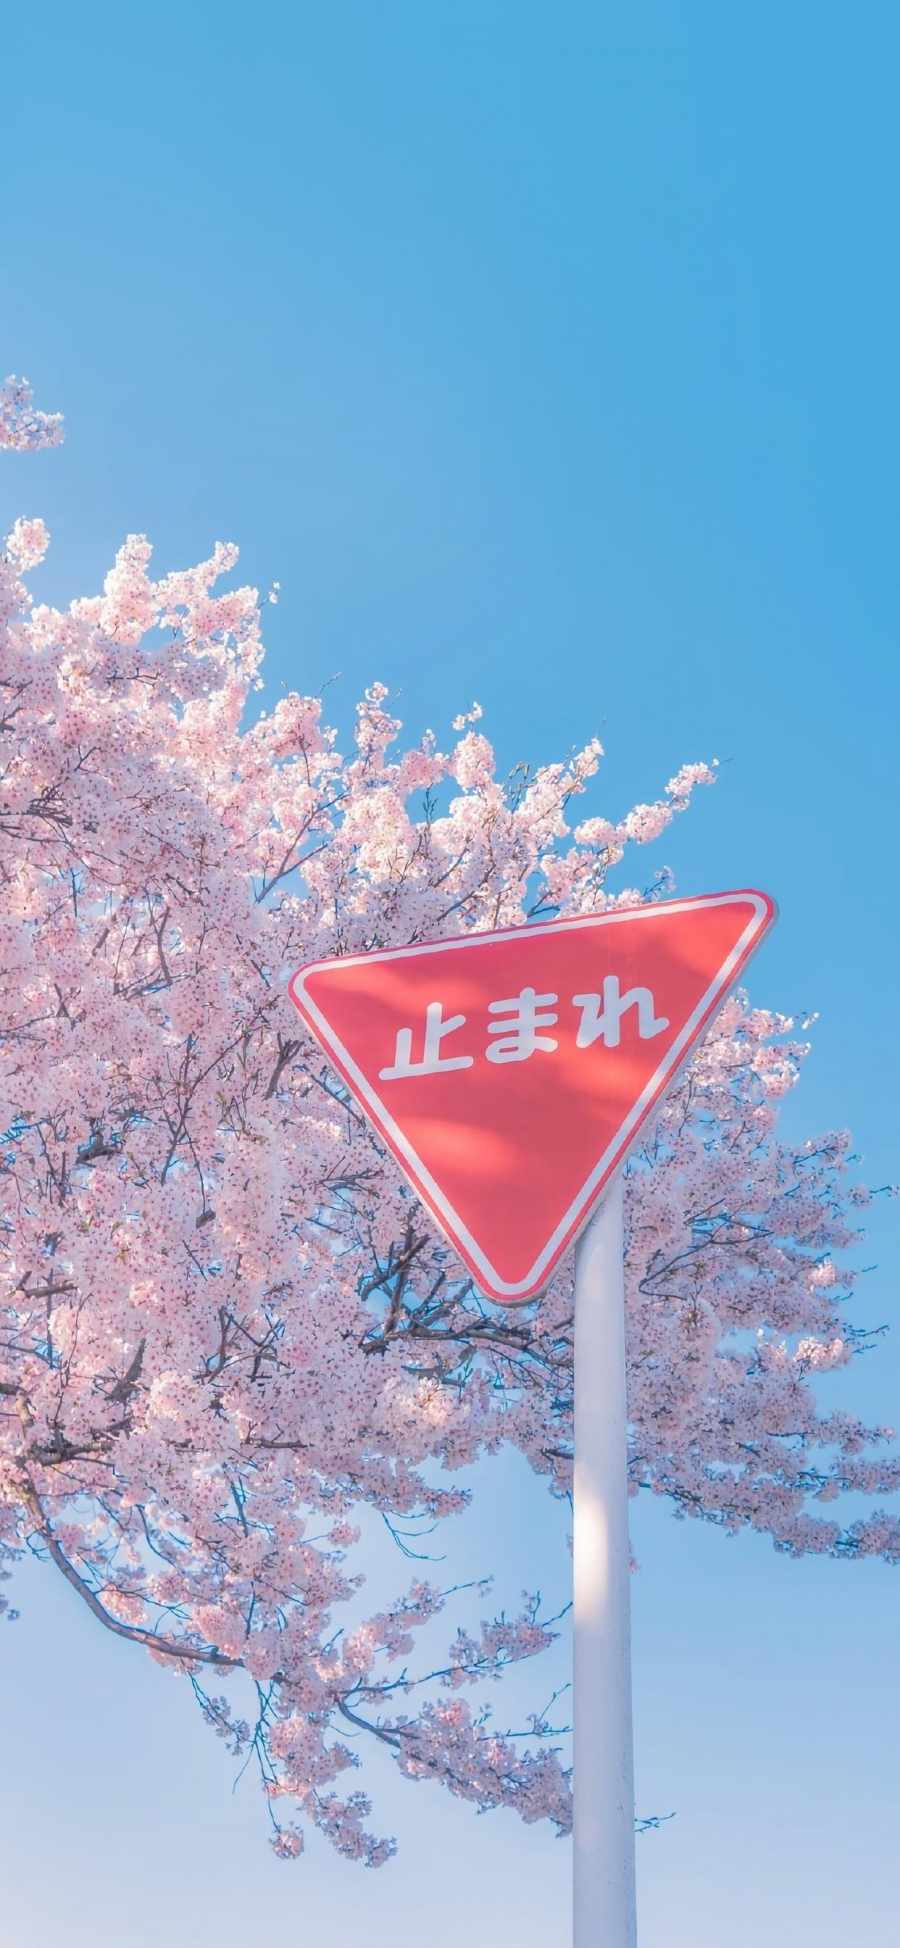 Cherry Blossom Tree and Sign iPhone Wallpaper HD